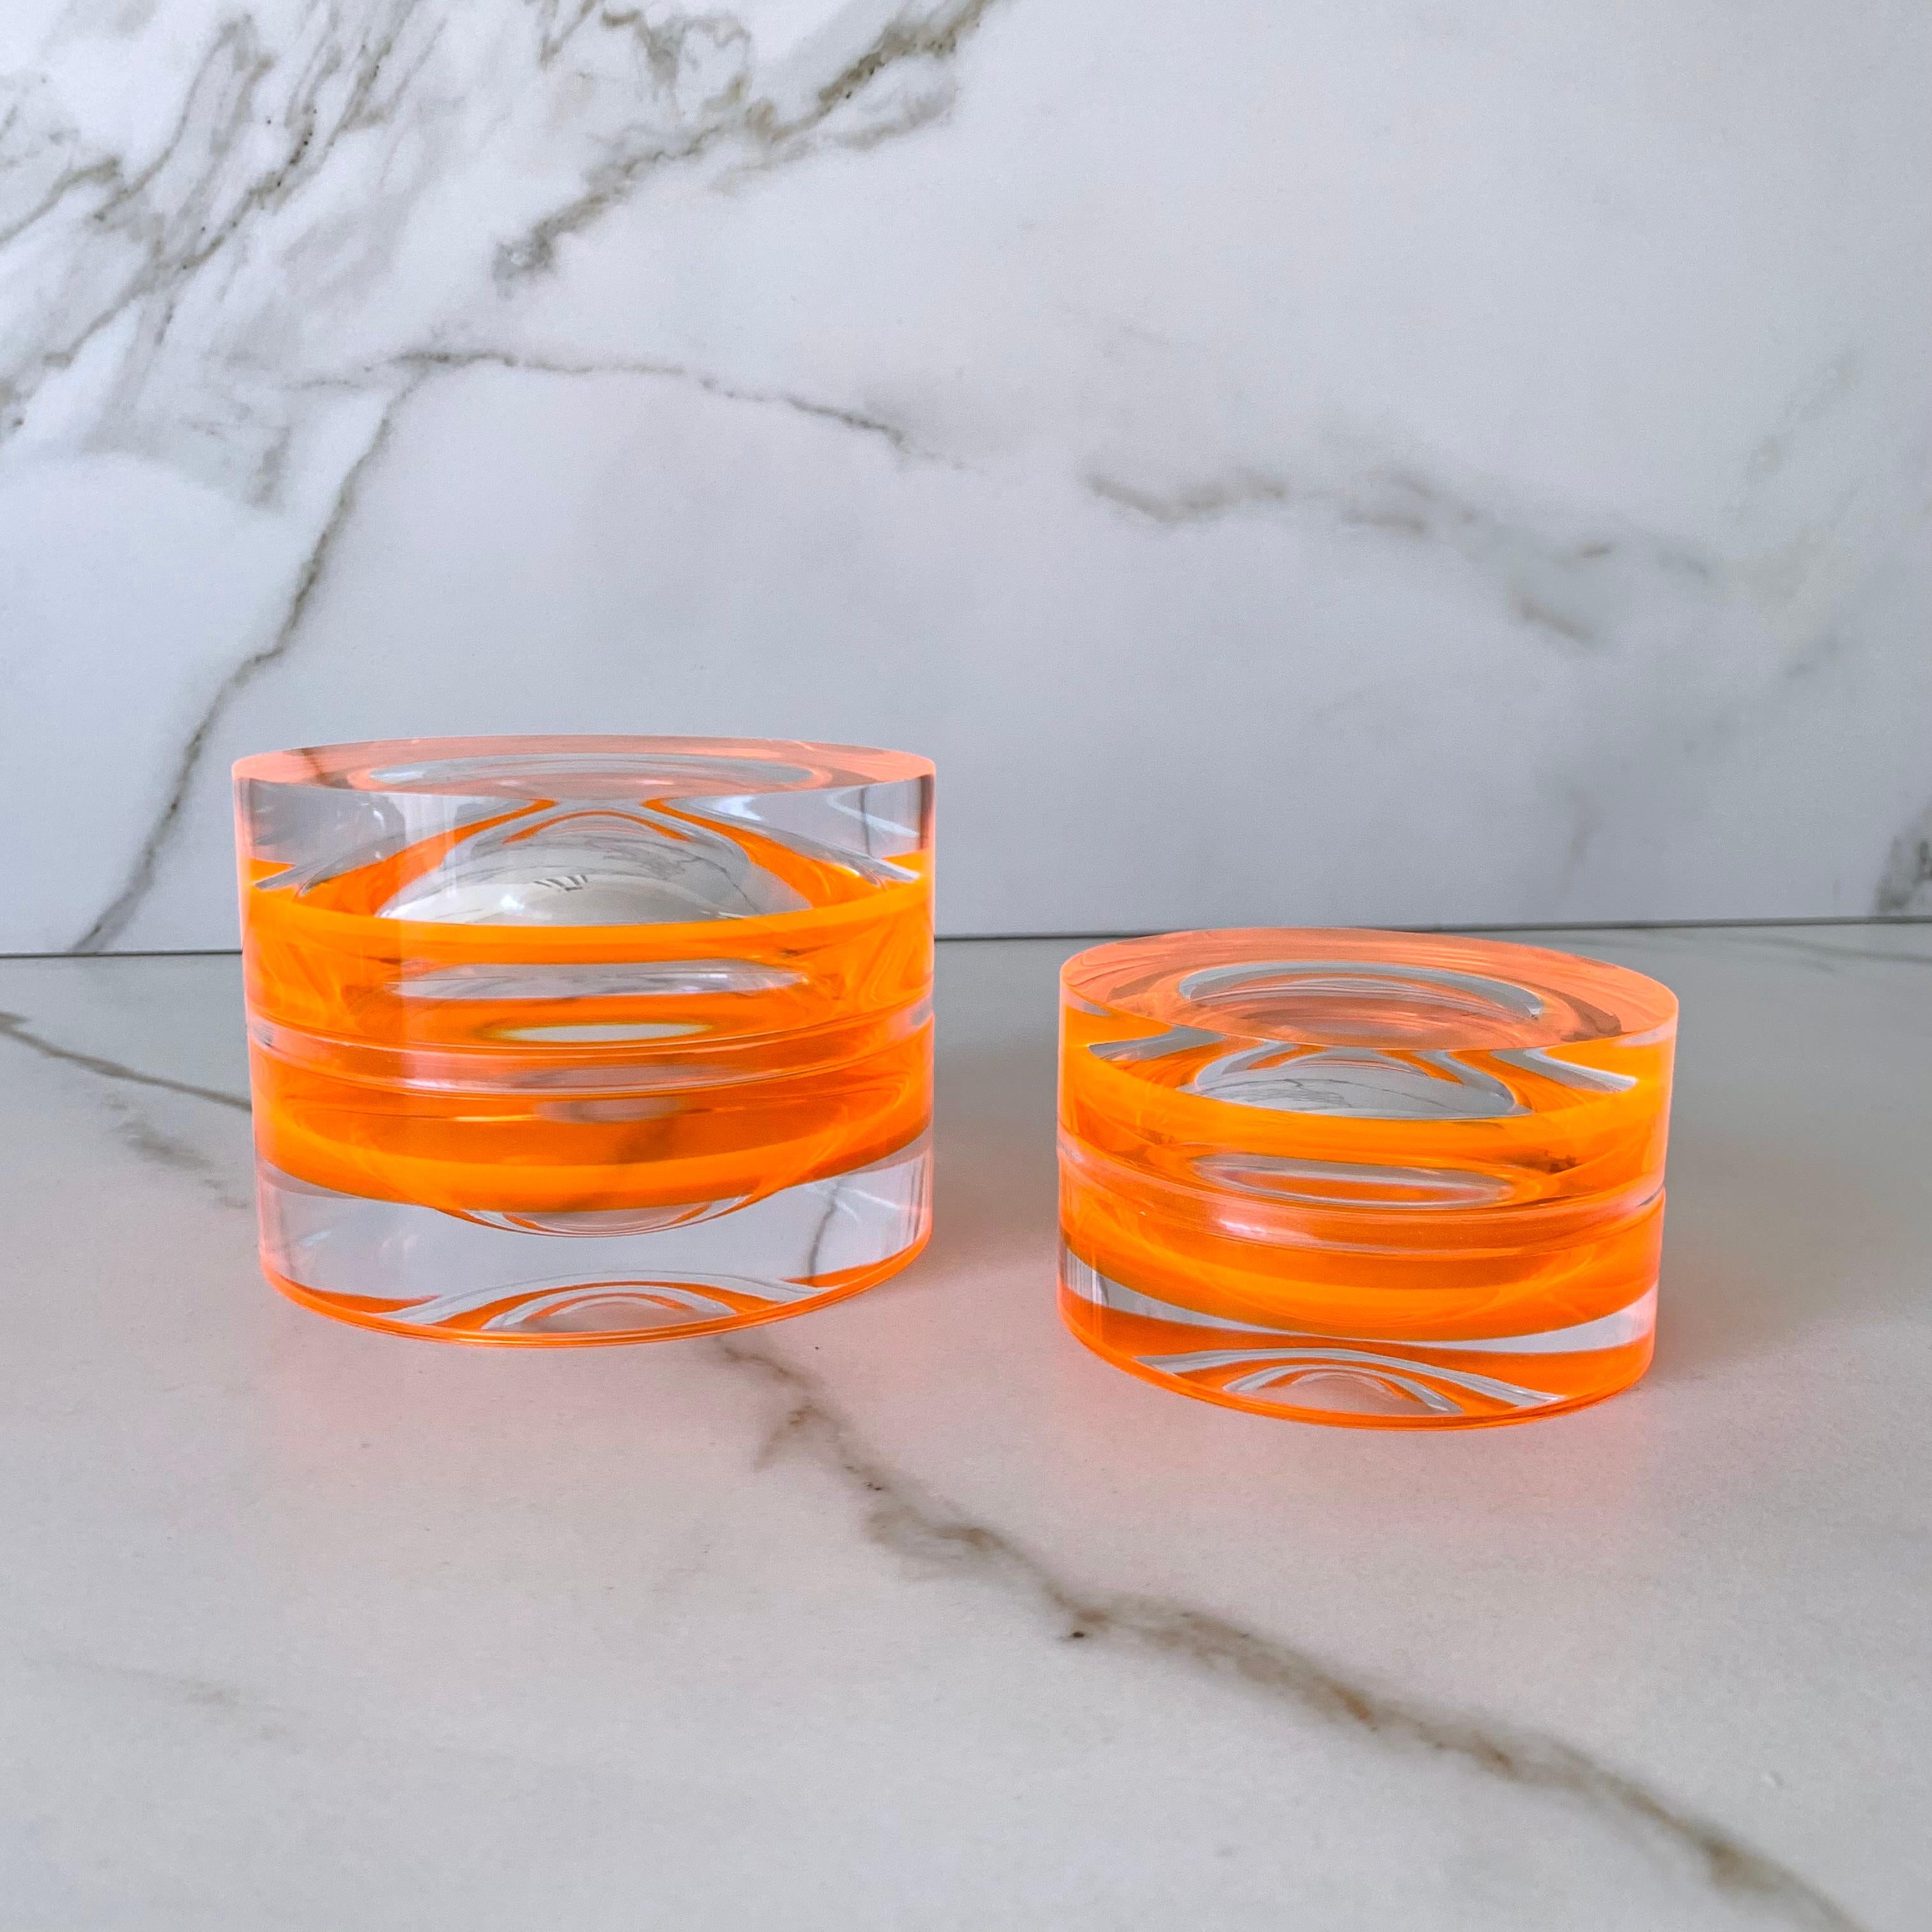 Modern, colorful and fun round box that can be used as a decorative element on a coffee table, desk or nightstand. Serving double duty as a storage box or as a candy bowl. 
They look beautiful when you pair the two available sizes.

Material: